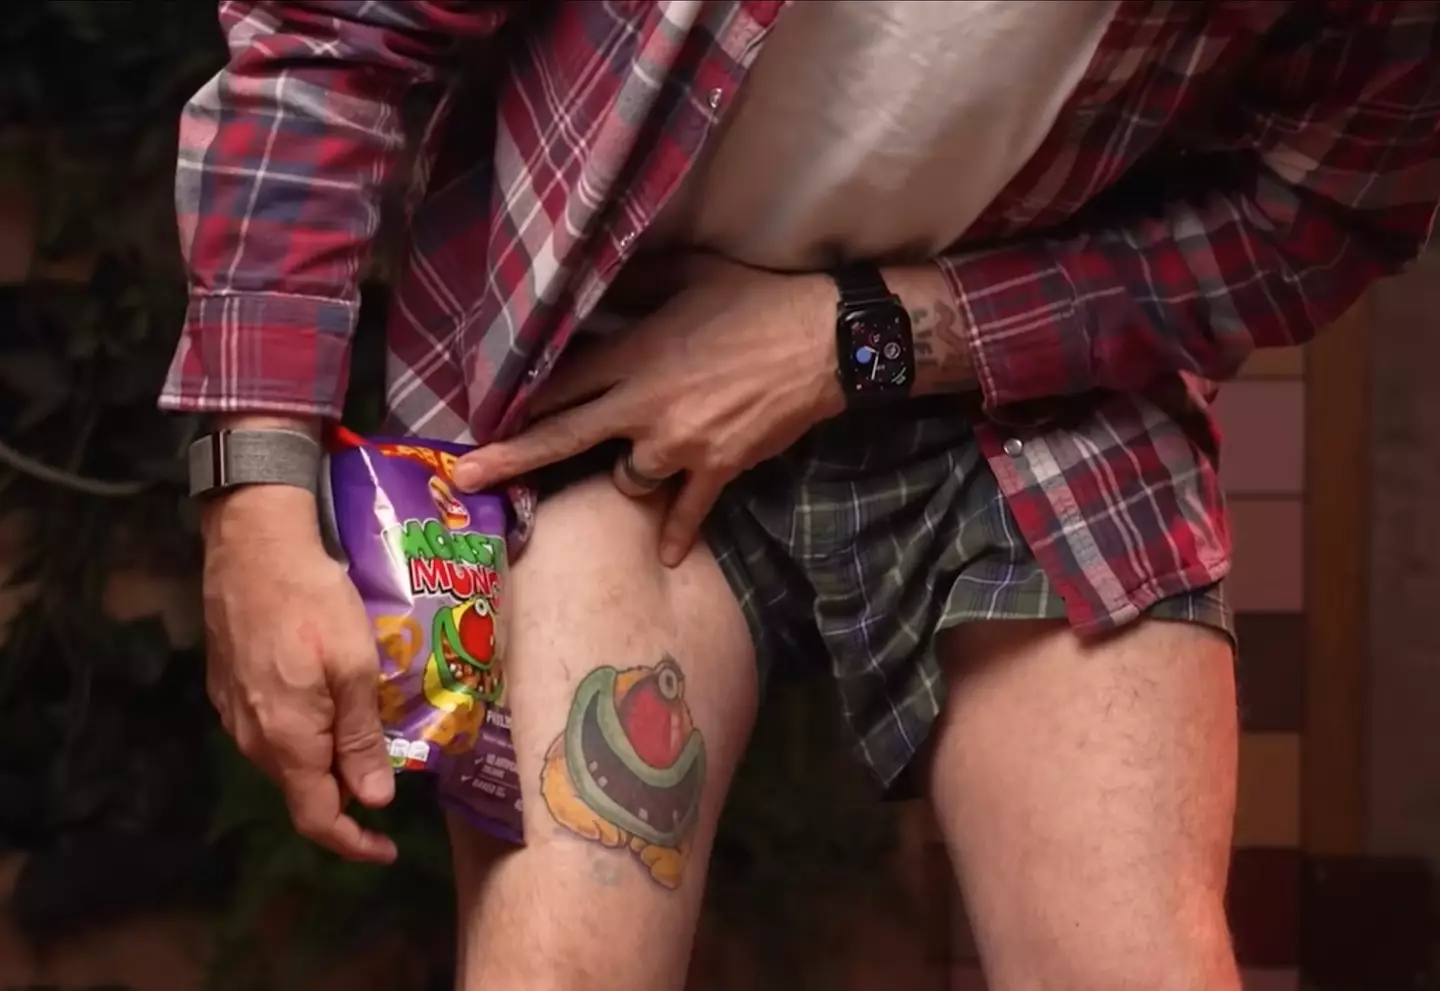 The stunt man has a tattoo dedicated to his obsession with Monster Munch.